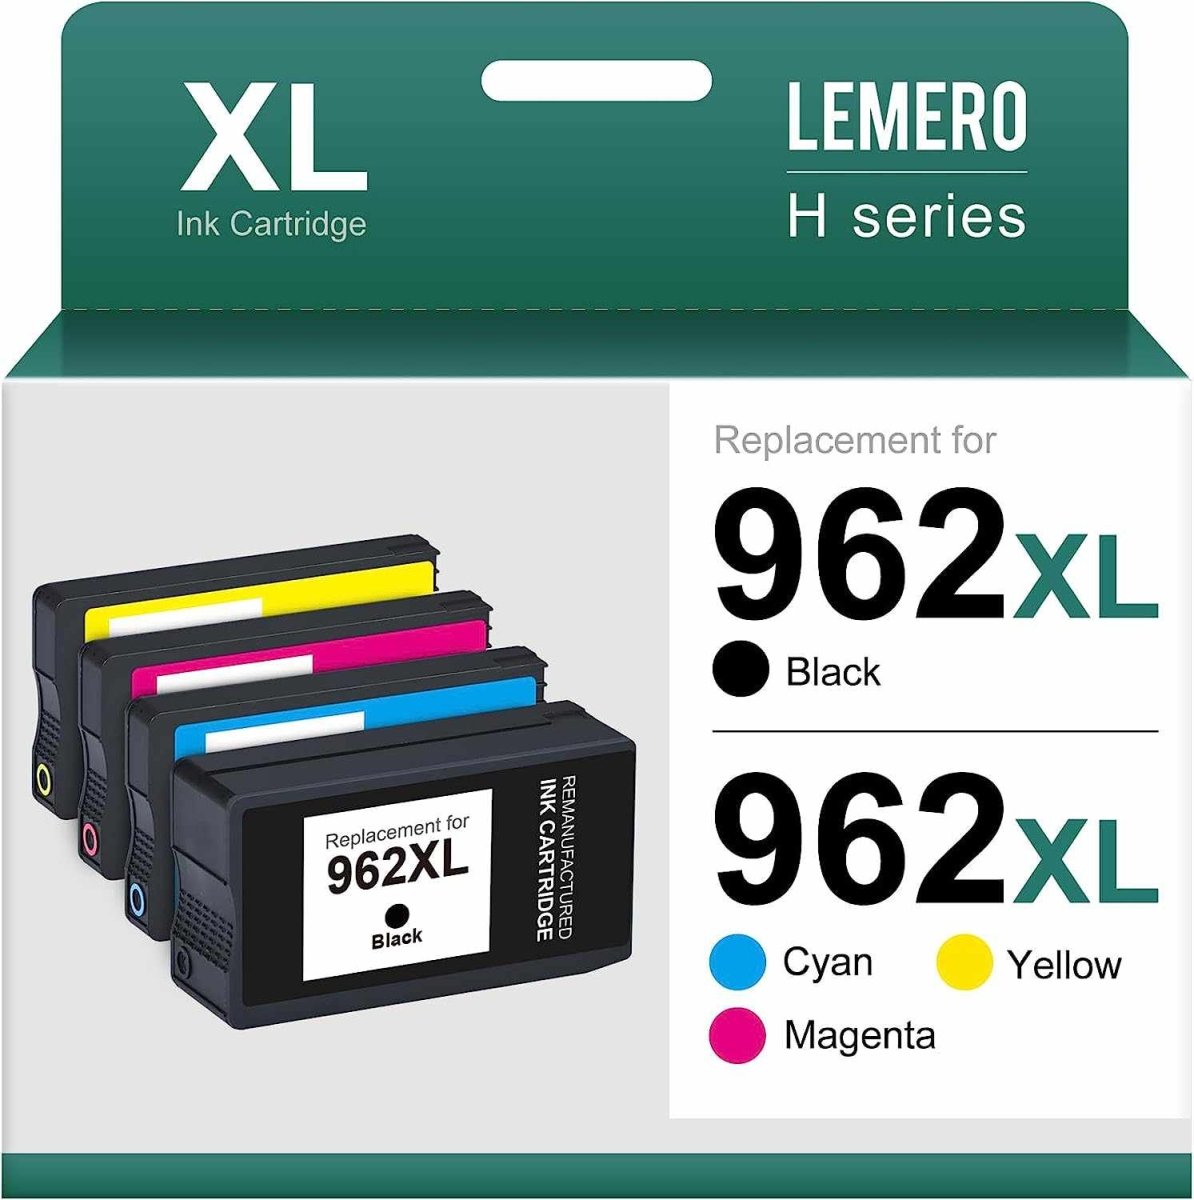 Original HP 962 Black Ink Cartridge | Works with HP OfficeJet 9010 Series,  HP OfficeJet Pro 9010, 9020 Series | Eligible for Instant Ink | 3HZ99AN